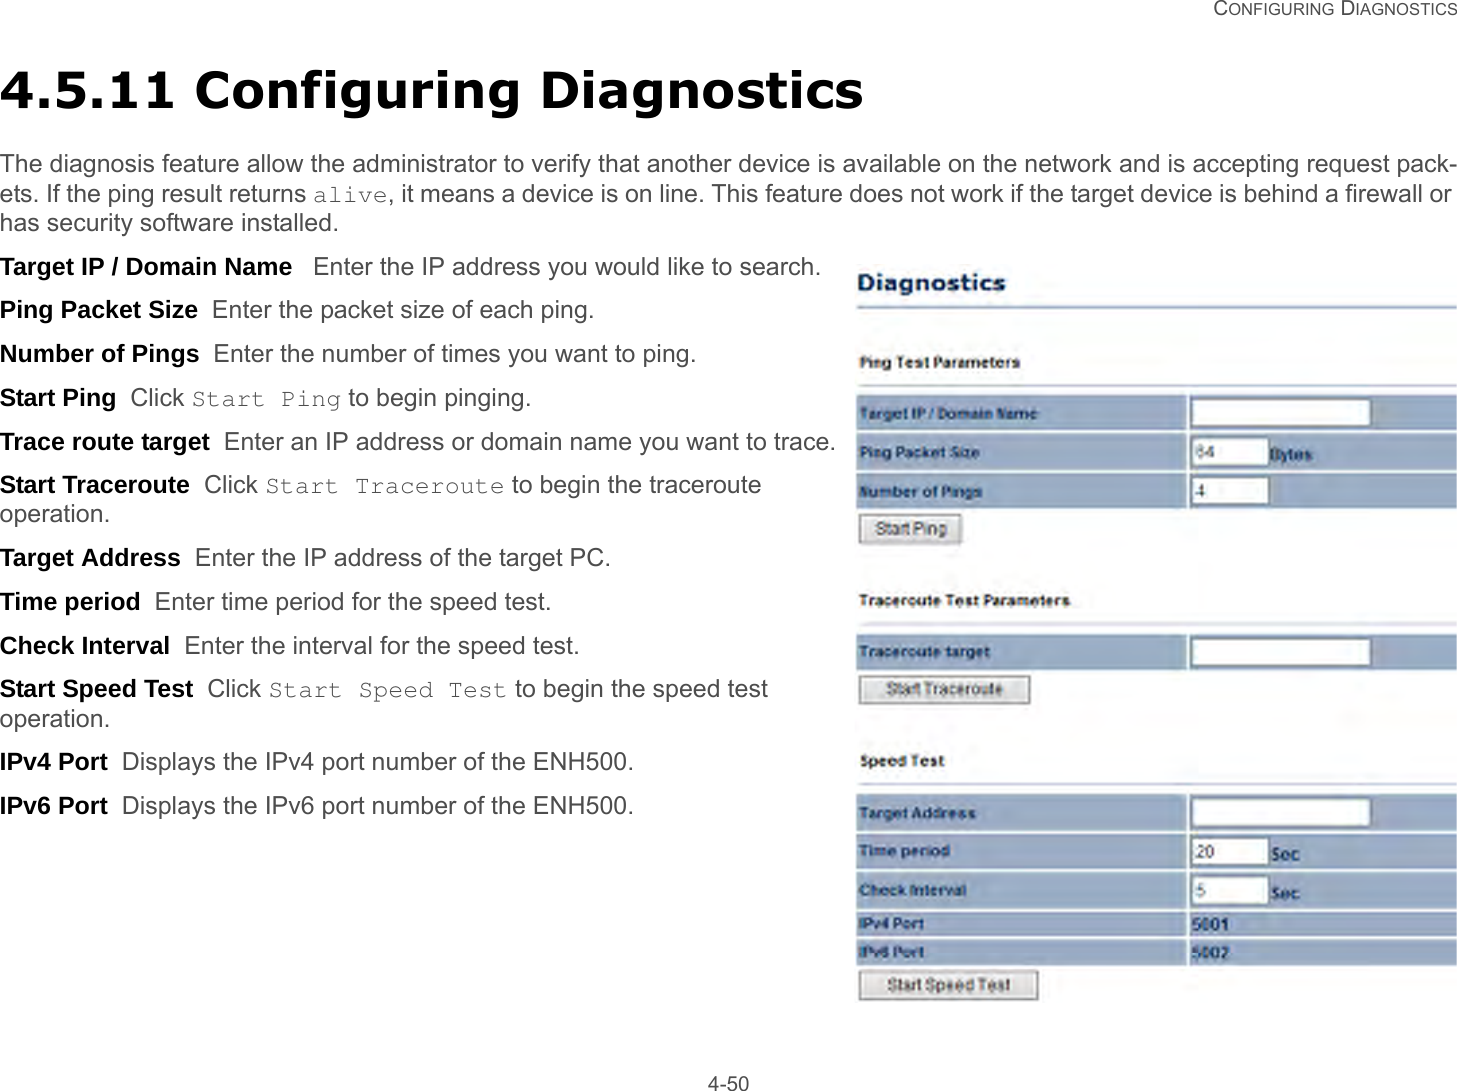   CONFIGURING DIAGNOSTICS 4-504.5.11 Configuring DiagnosticsThe diagnosis feature allow the administrator to verify that another device is available on the network and is accepting request pack-ets. If the ping result returns alive, it means a device is on line. This feature does not work if the target device is behind a firewall or has security software installed.Target IP / Domain Name   Enter the IP address you would like to search.Ping Packet Size  Enter the packet size of each ping.Number of Pings  Enter the number of times you want to ping.Start Ping  Click Start Ping to begin pinging.Trace route target  Enter an IP address or domain name you want to trace.Start Traceroute  Click Start Traceroute to begin the traceroute operation.Target Address  Enter the IP address of the target PC.Time period  Enter time period for the speed test.Check Interval  Enter the interval for the speed test.Start Speed Test  Click Start Speed Test to begin the speed test operation.IPv4 Port  Displays the IPv4 port number of the ENH500.IPv6 Port  Displays the IPv6 port number of the ENH500.